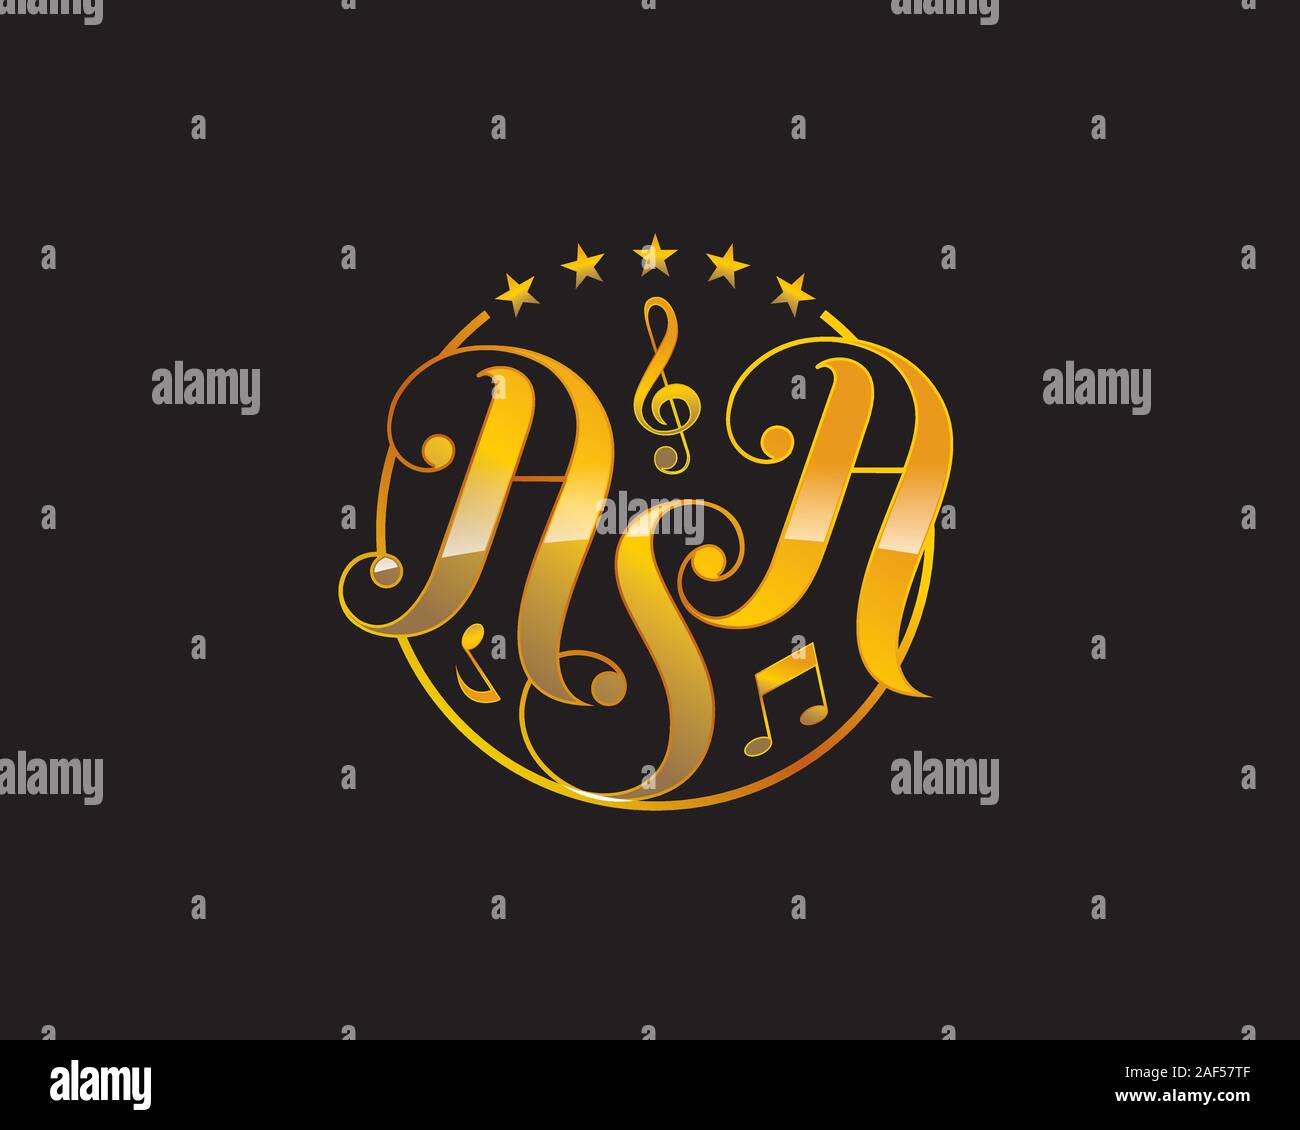 golden initial letter A S A in classic retro vintage style with stars and musical notes Stock Vector